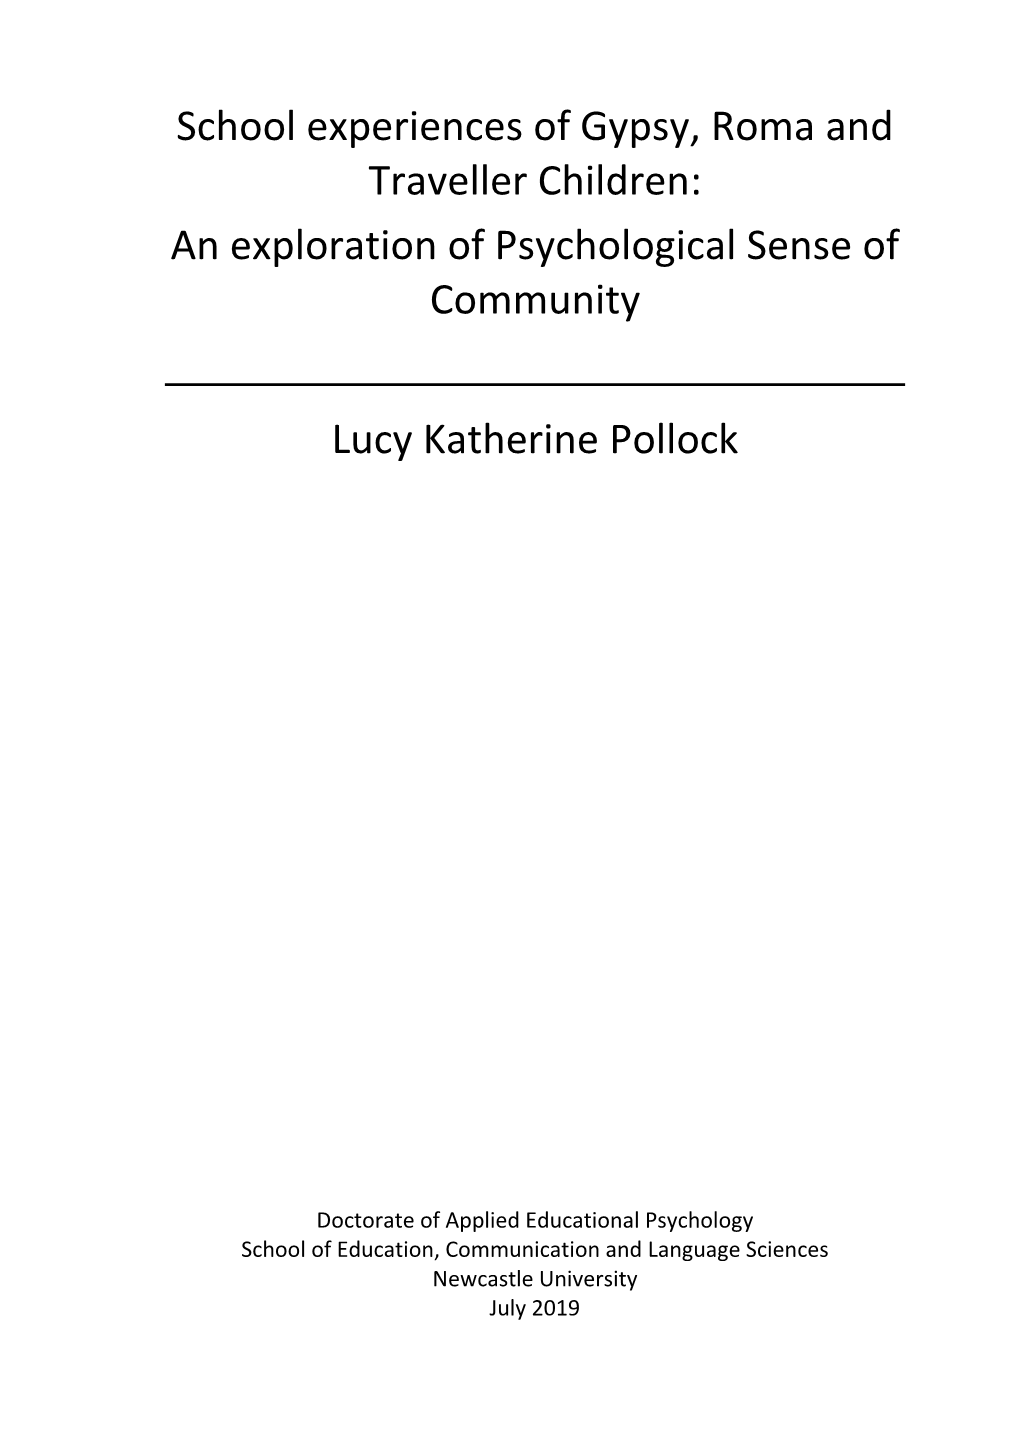 School Experiences of Gypsy, Roma and Traveller Children: an Exploration of Psychological Sense of Community